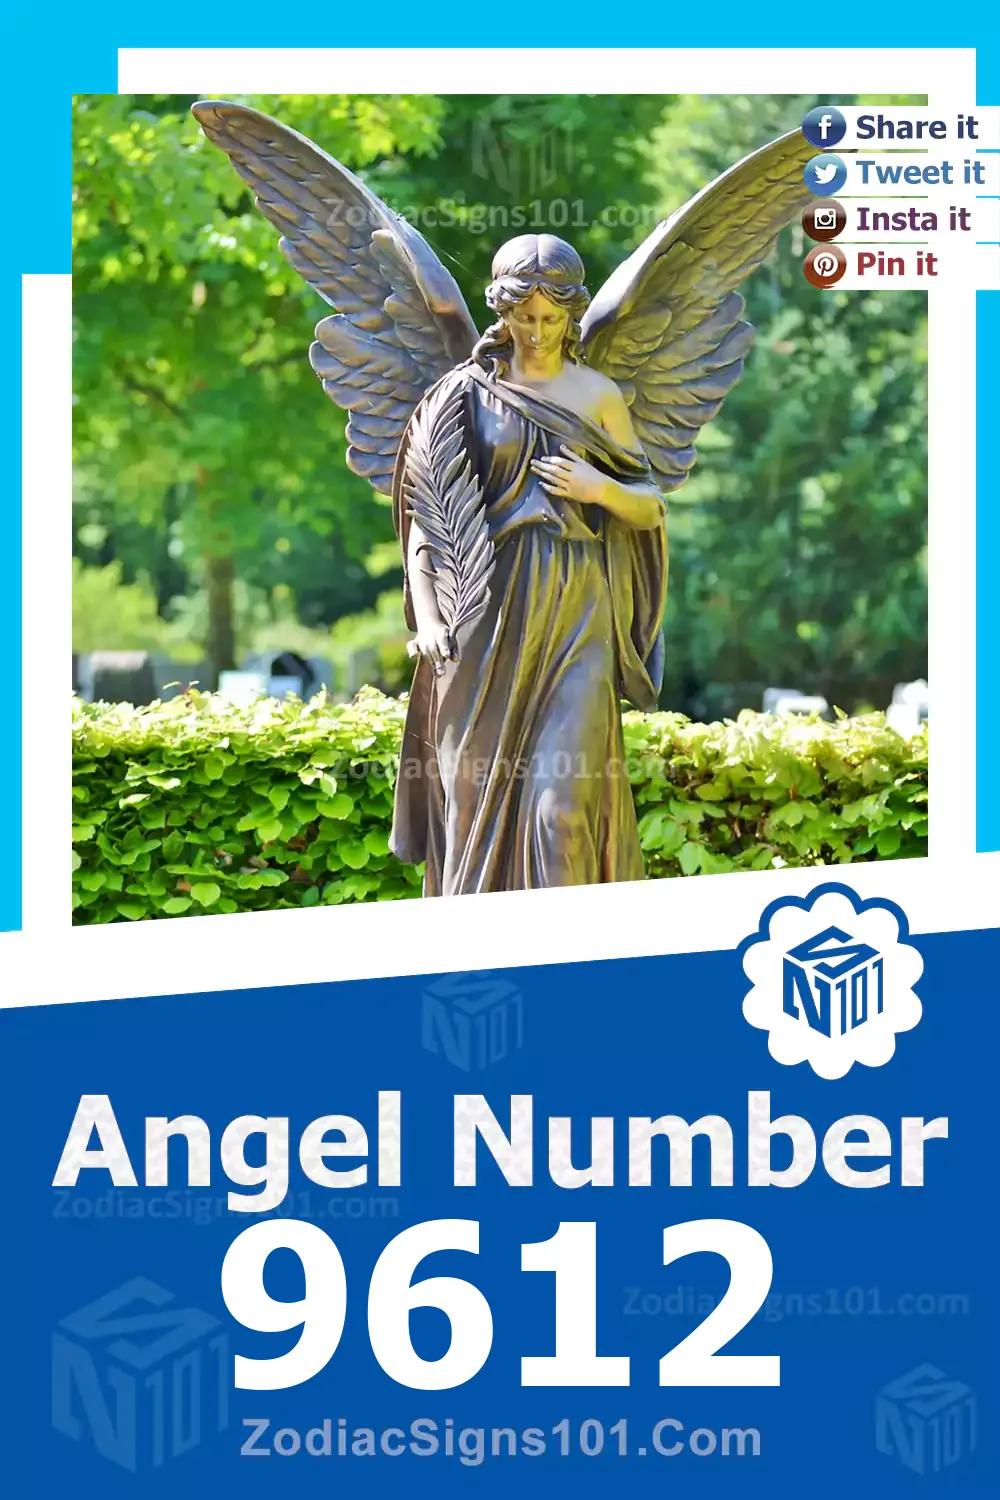 9612 Angel Number Meaning